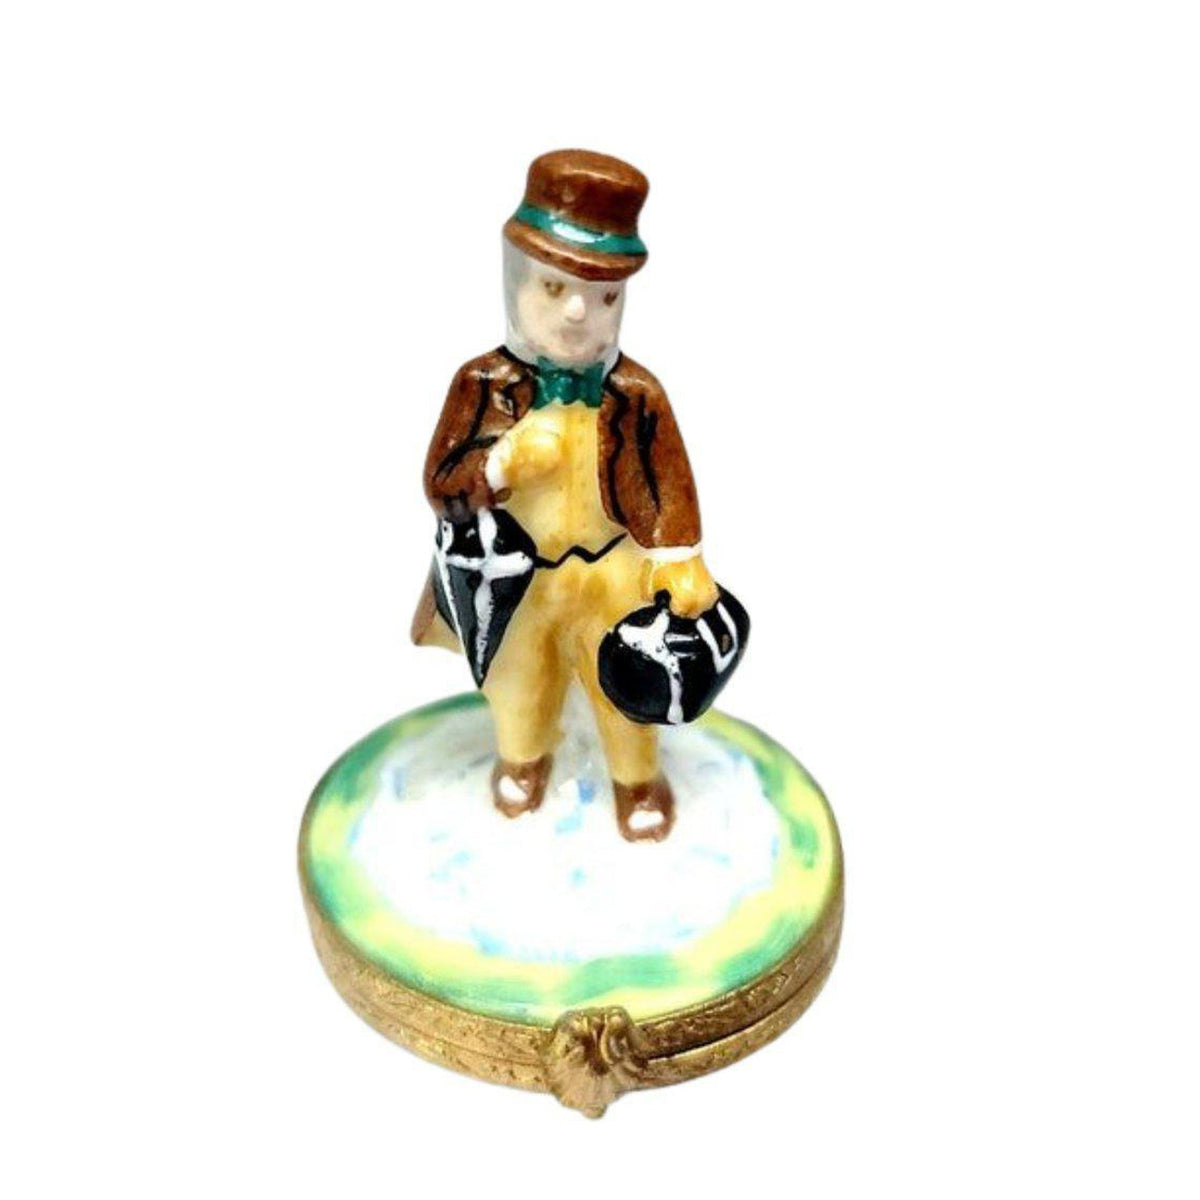 The Housecall Good Doctor physician Limoges Box Figurine - Limoges Box Boutique